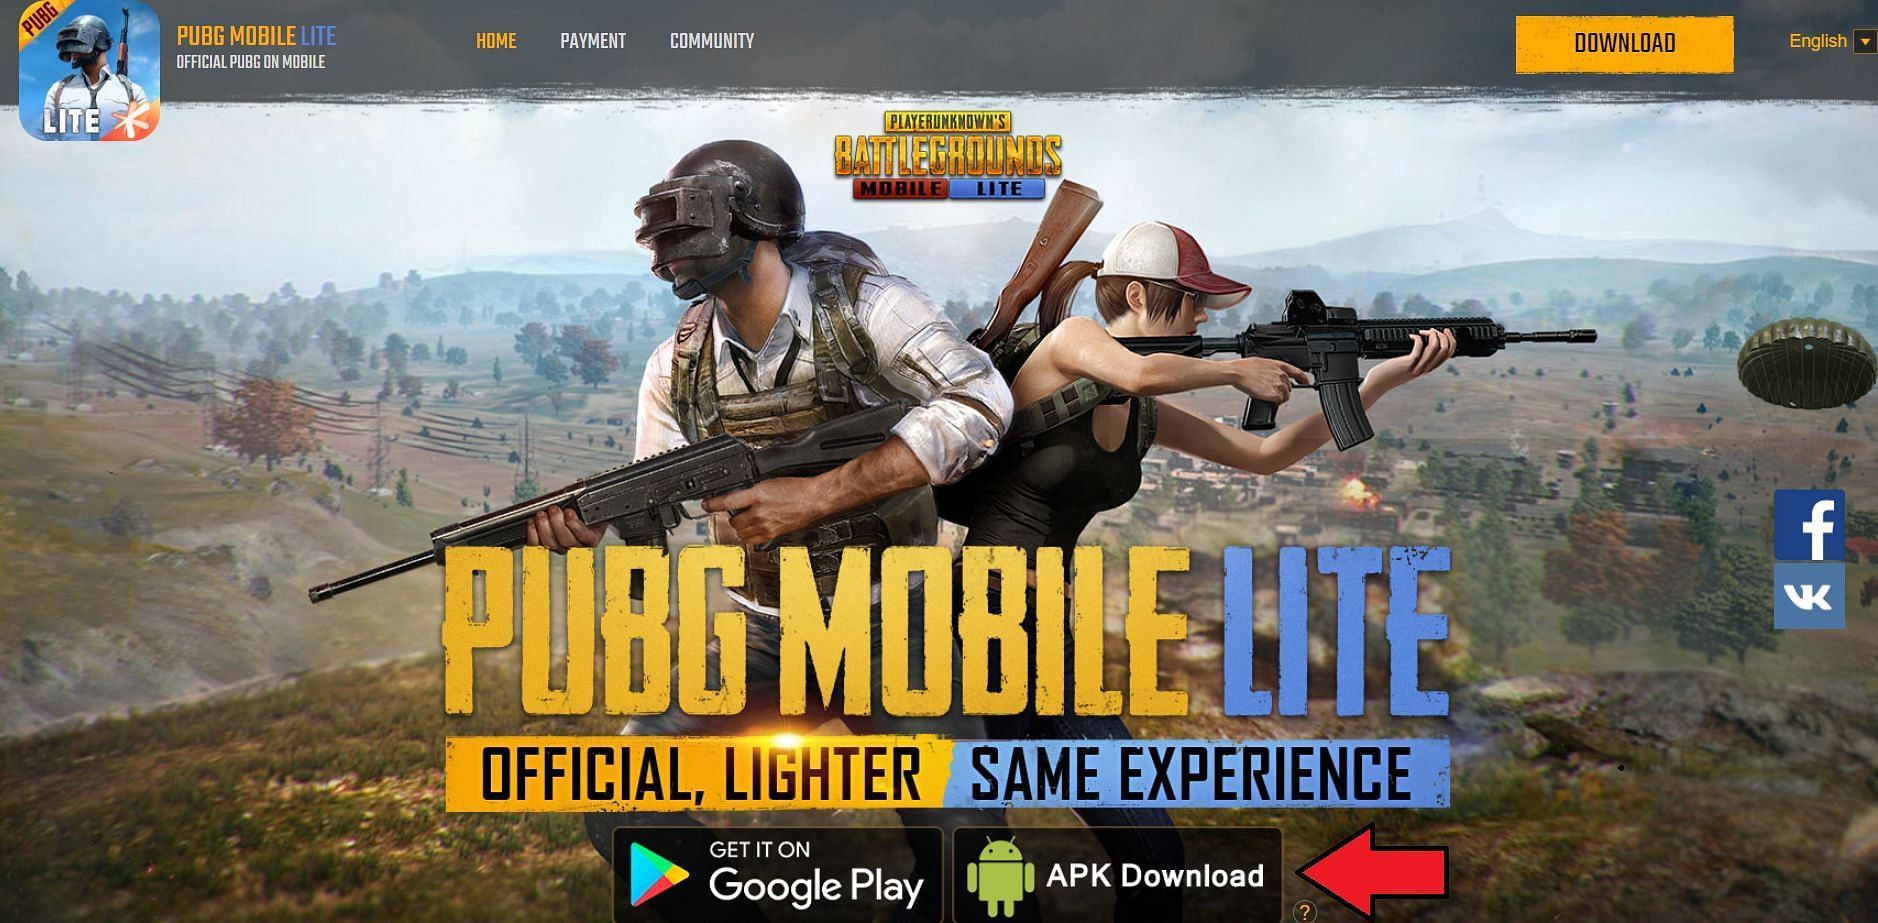 This option will start the download process (Image via PUBG Mobile Lite)